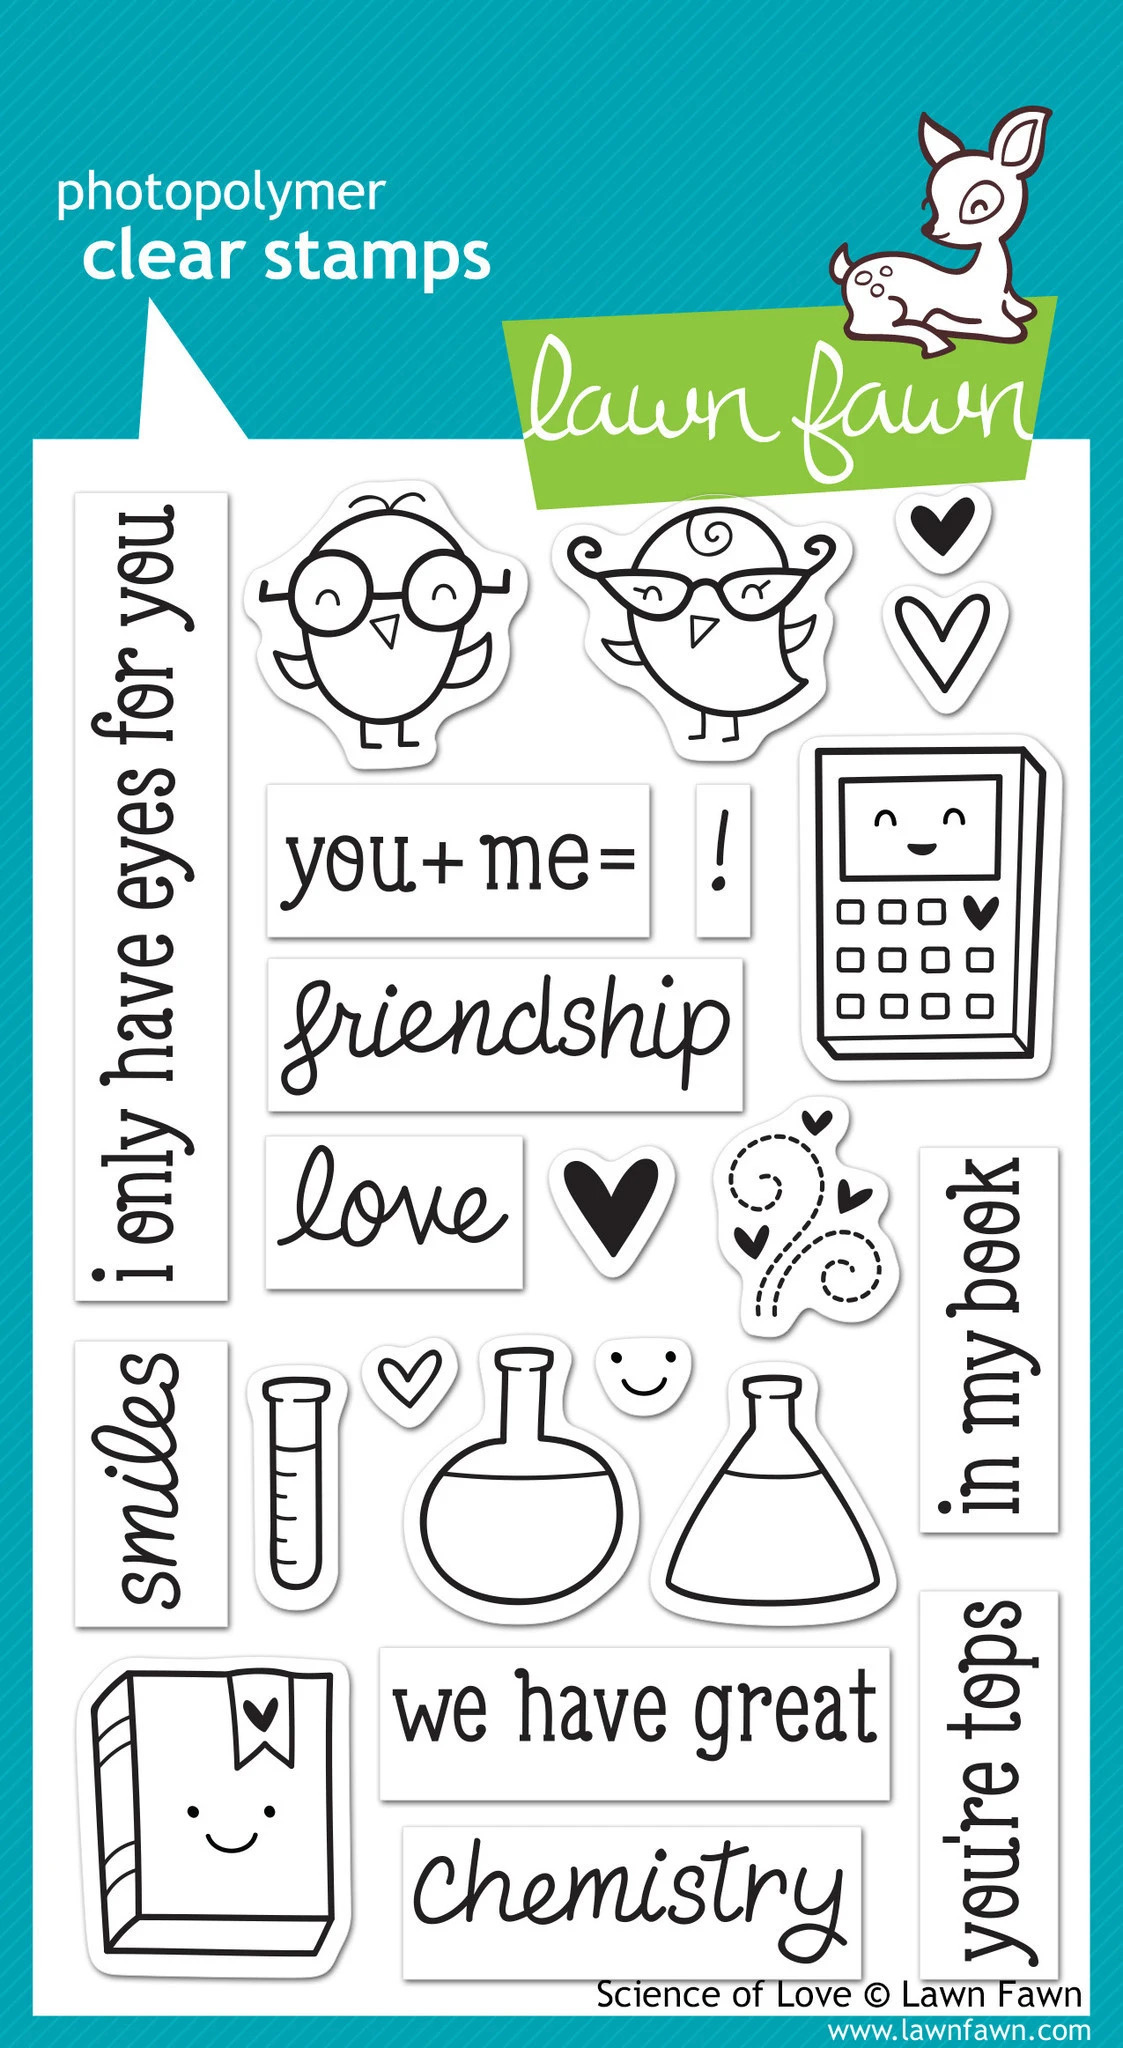 Science Of Love stamps